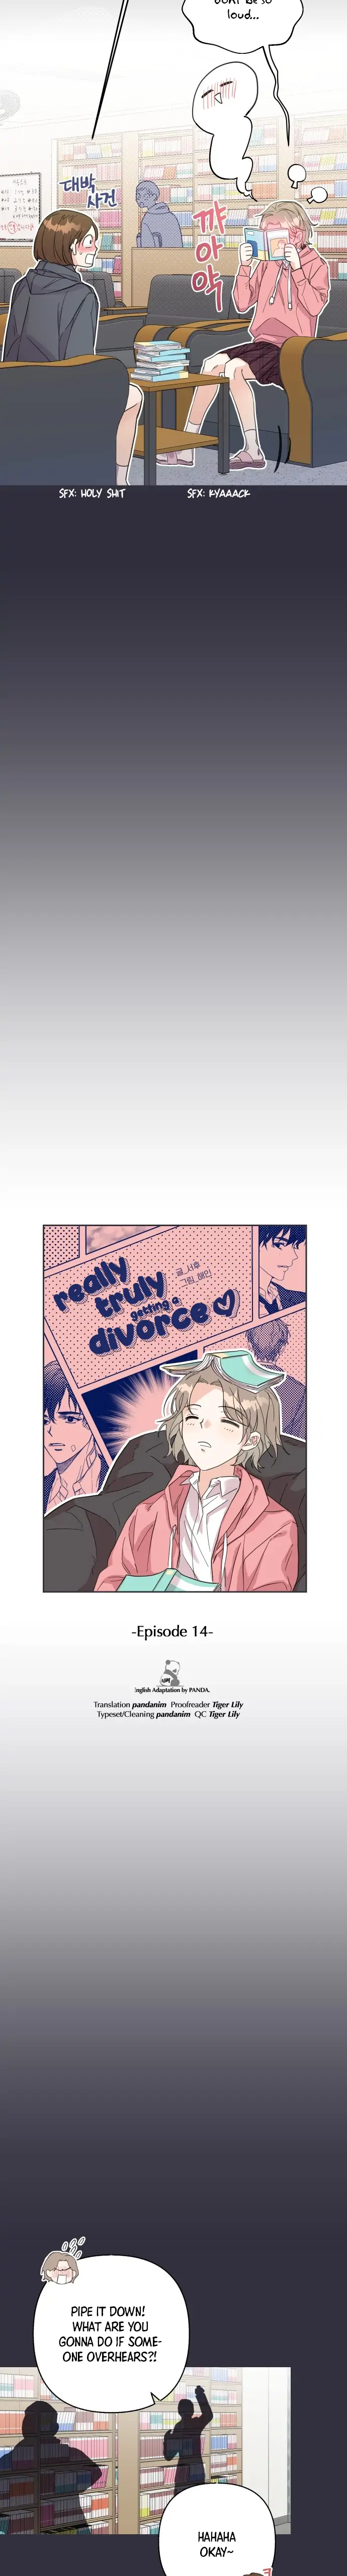 Really Truly Getting a Divorce chapter 14